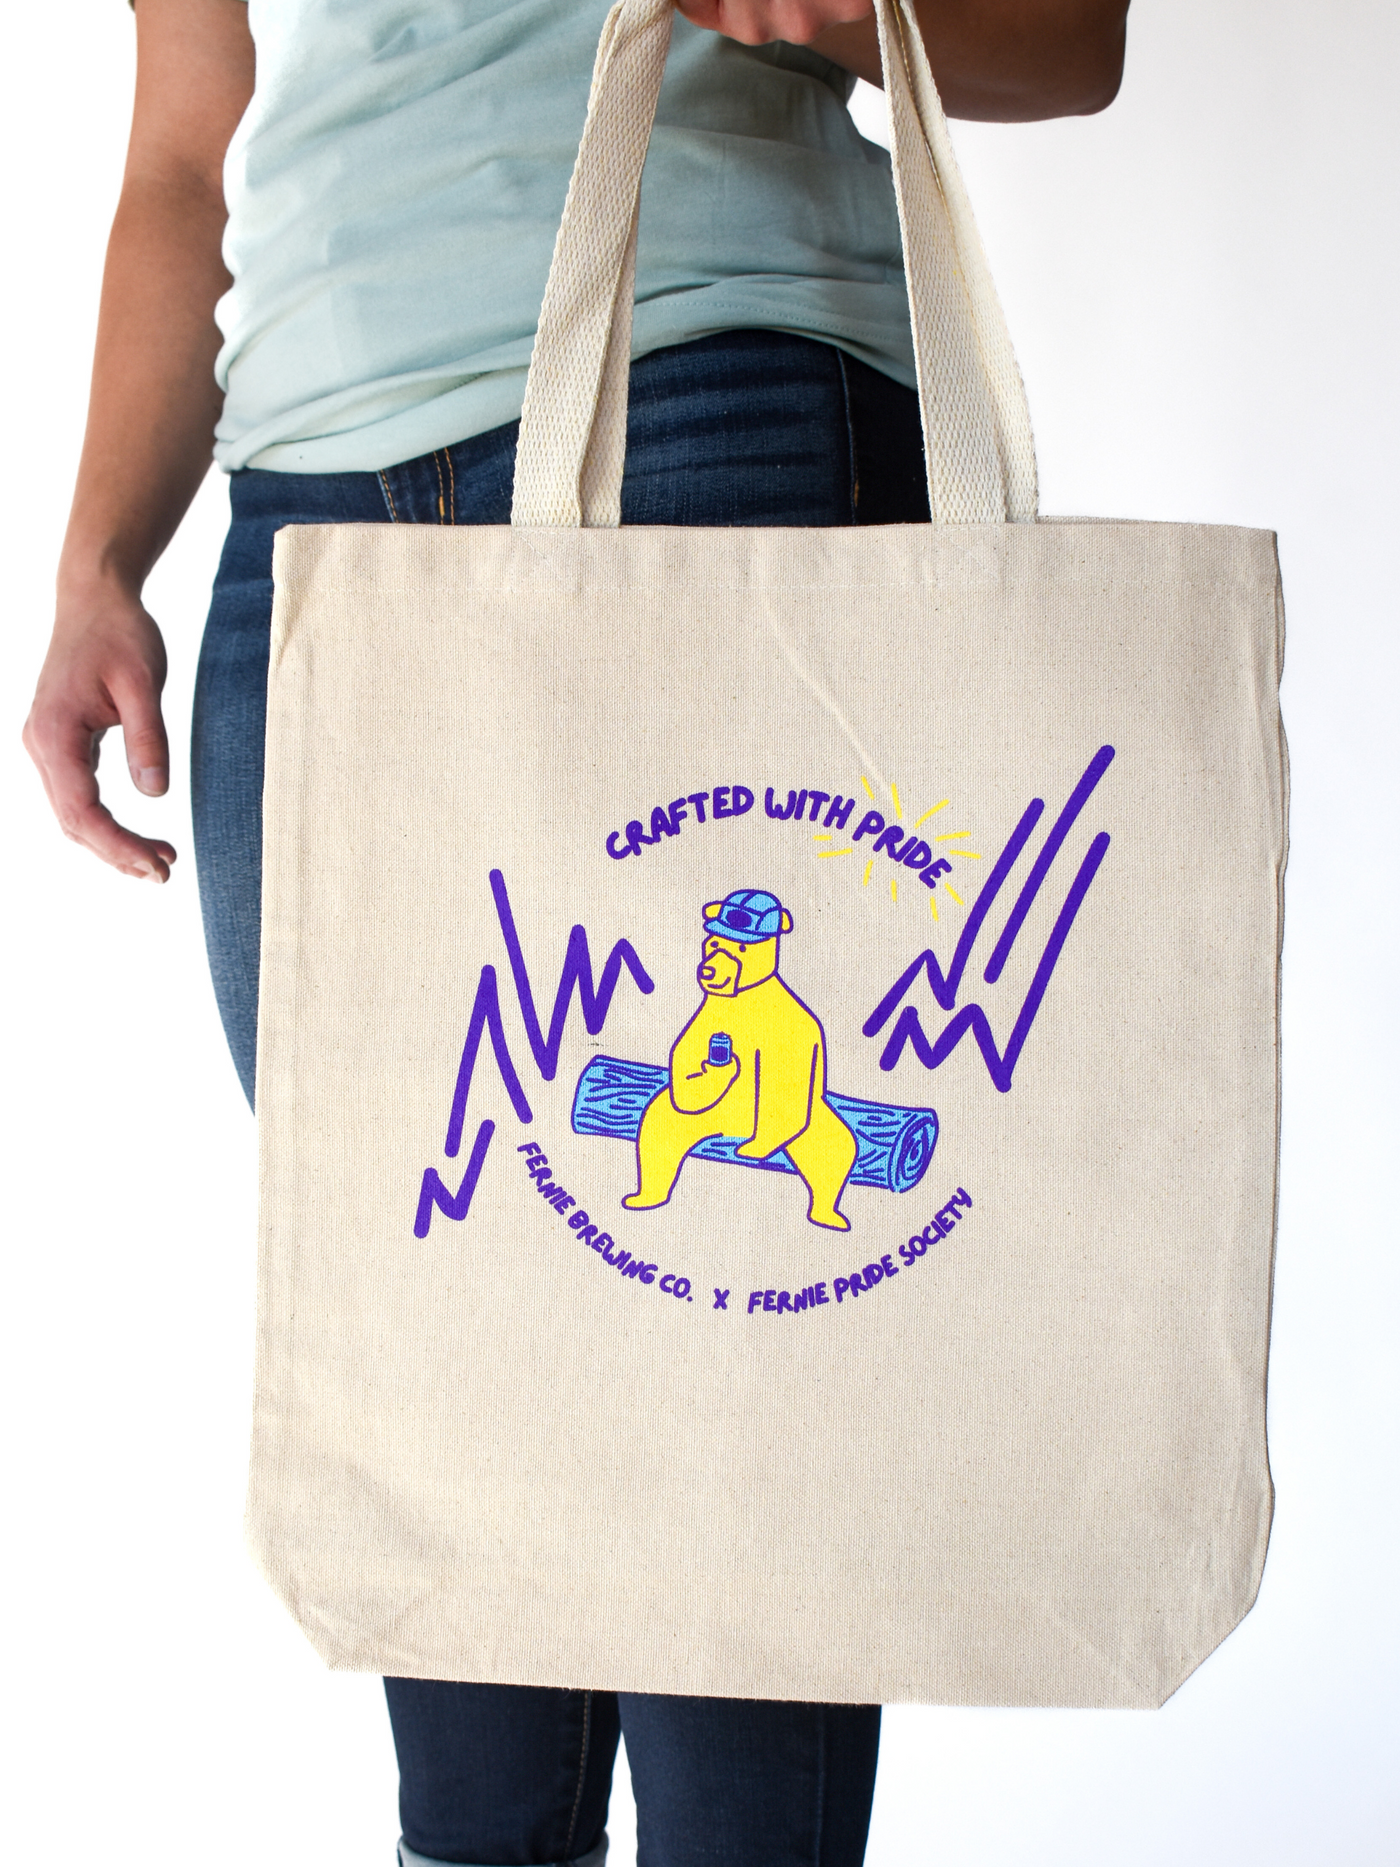 Crafted with Pride Tote Bag